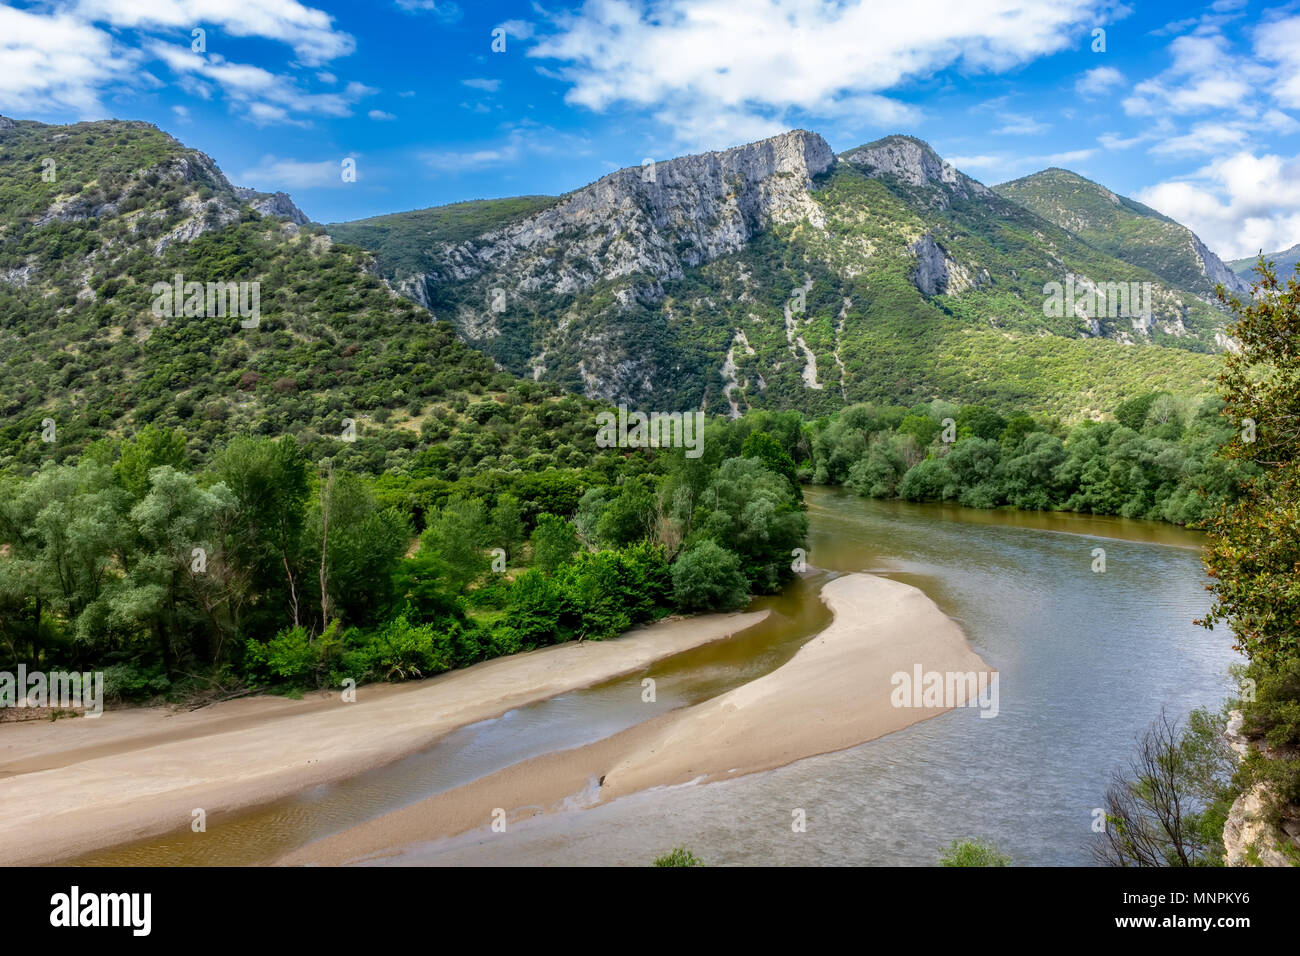 Mountain landscape close to river Nestos in Greece with railways. Stock Photo